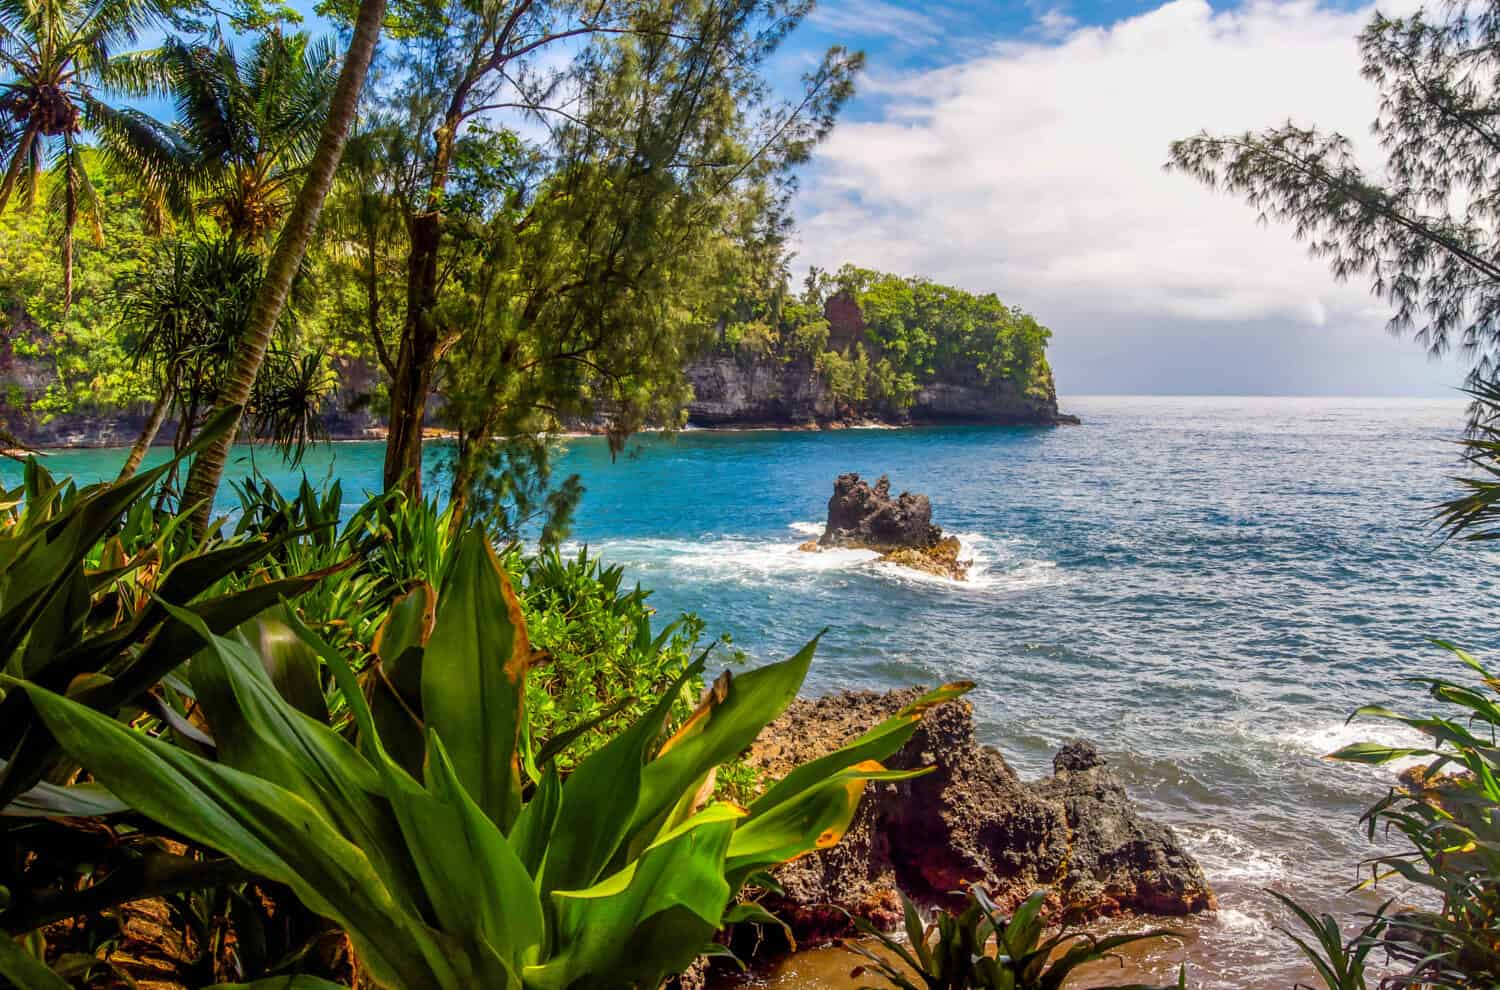 An opening in the rain forest near Hilo, Hawaii on a rocky beach shore reveals high cliffs overlooking the vast blue Pacific Ocean.